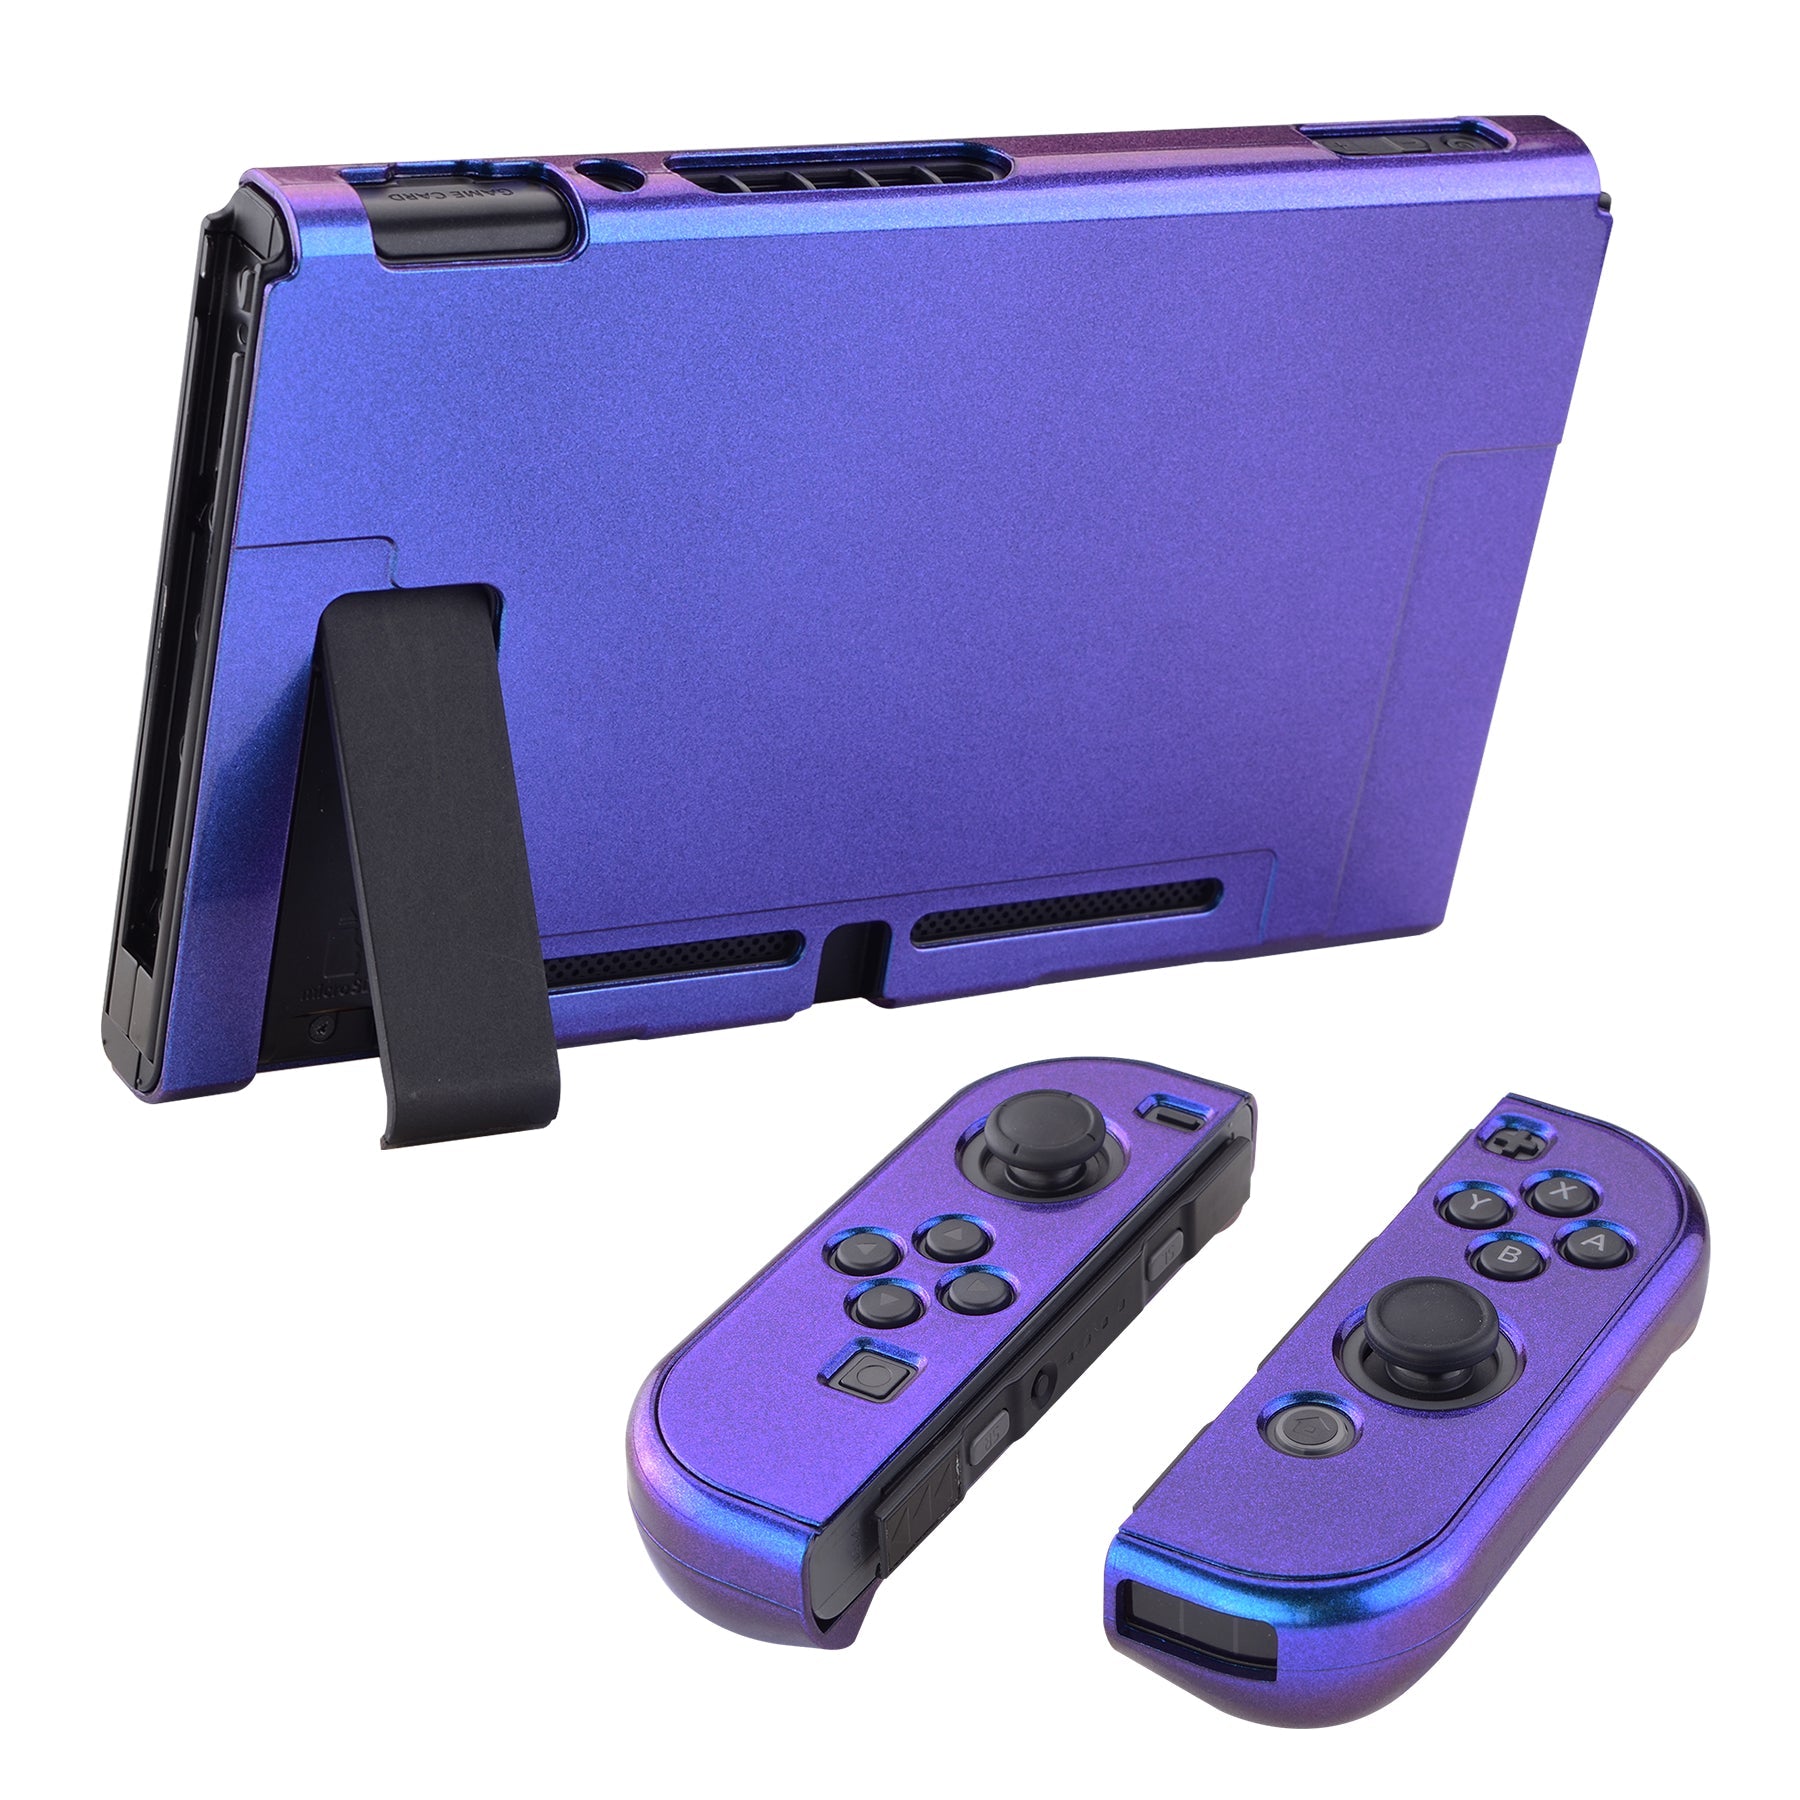 PlayVital Chameleon Purple Blue Glossy Back Cover for NS Switch Console, NS Joycon Handheld Controller Separable Protector Hard Shell, Customized Dockable Protective Case for NS Switch - NTP303 PlayVital